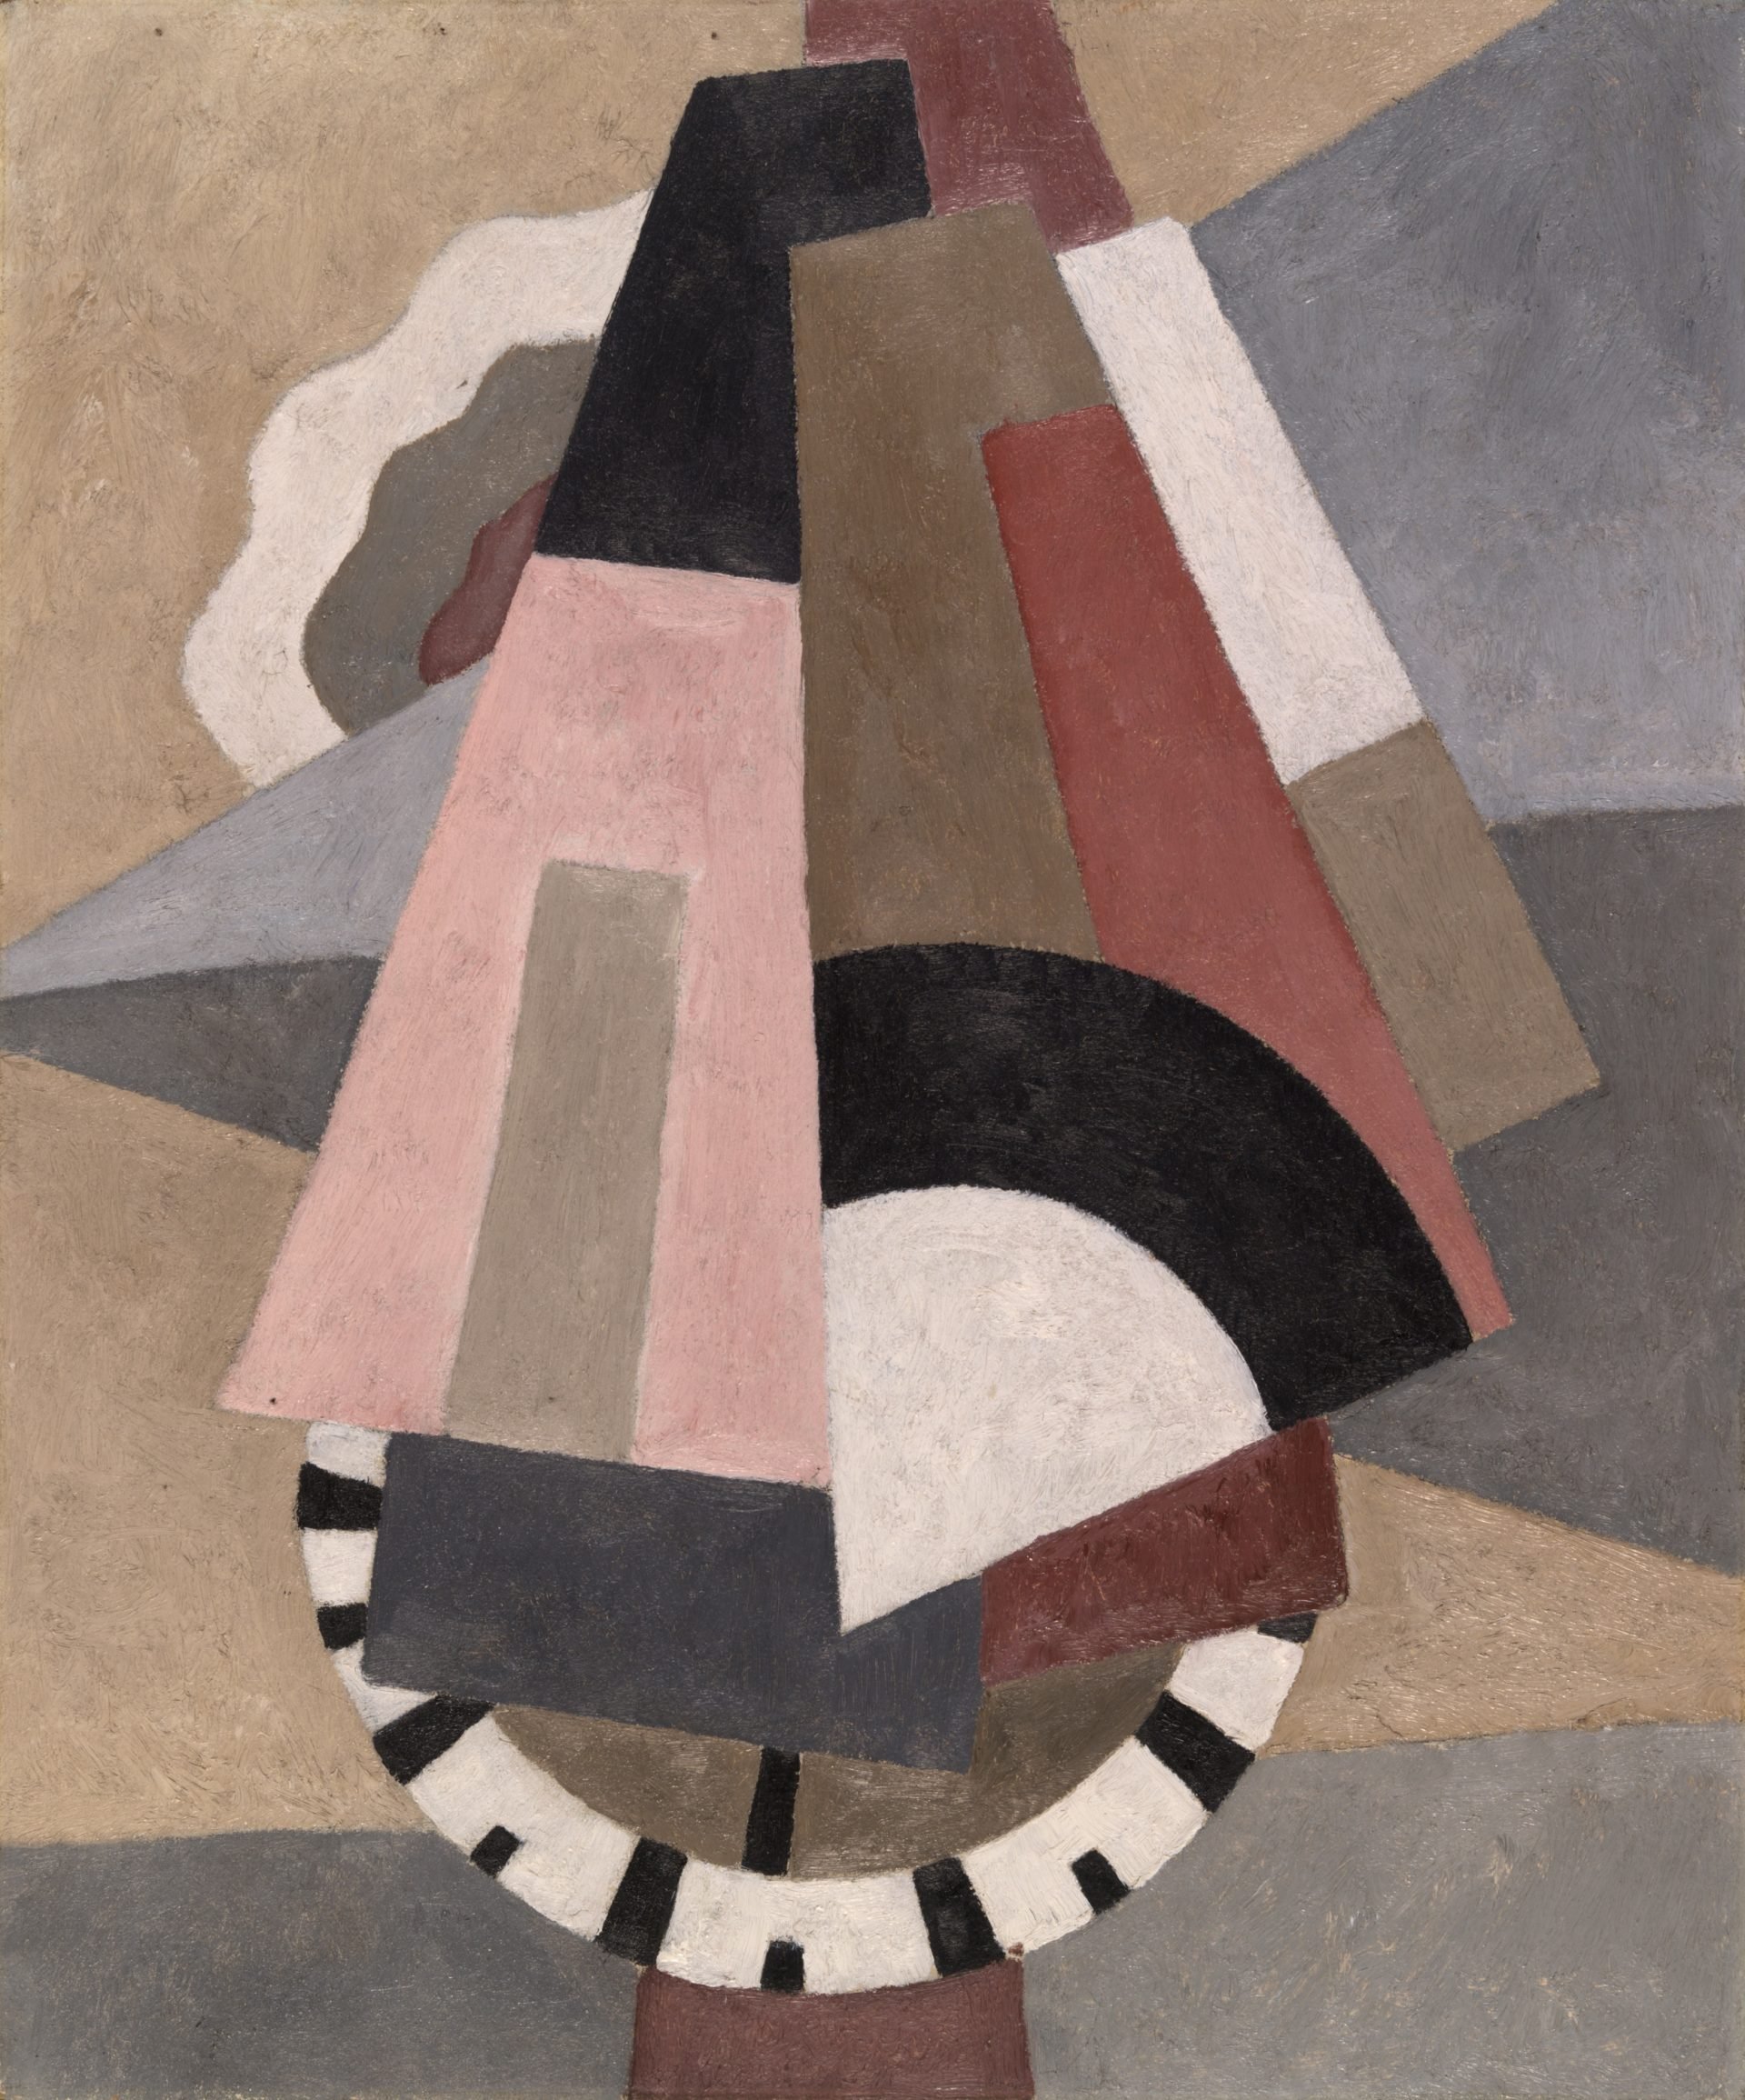 "Provincetown" by Marsden Hartley, 1916, an abstract painting featuring interlocking geometric shapes in a muted palette, suggesting a triangular composition with a strong black and white semi-circular base.